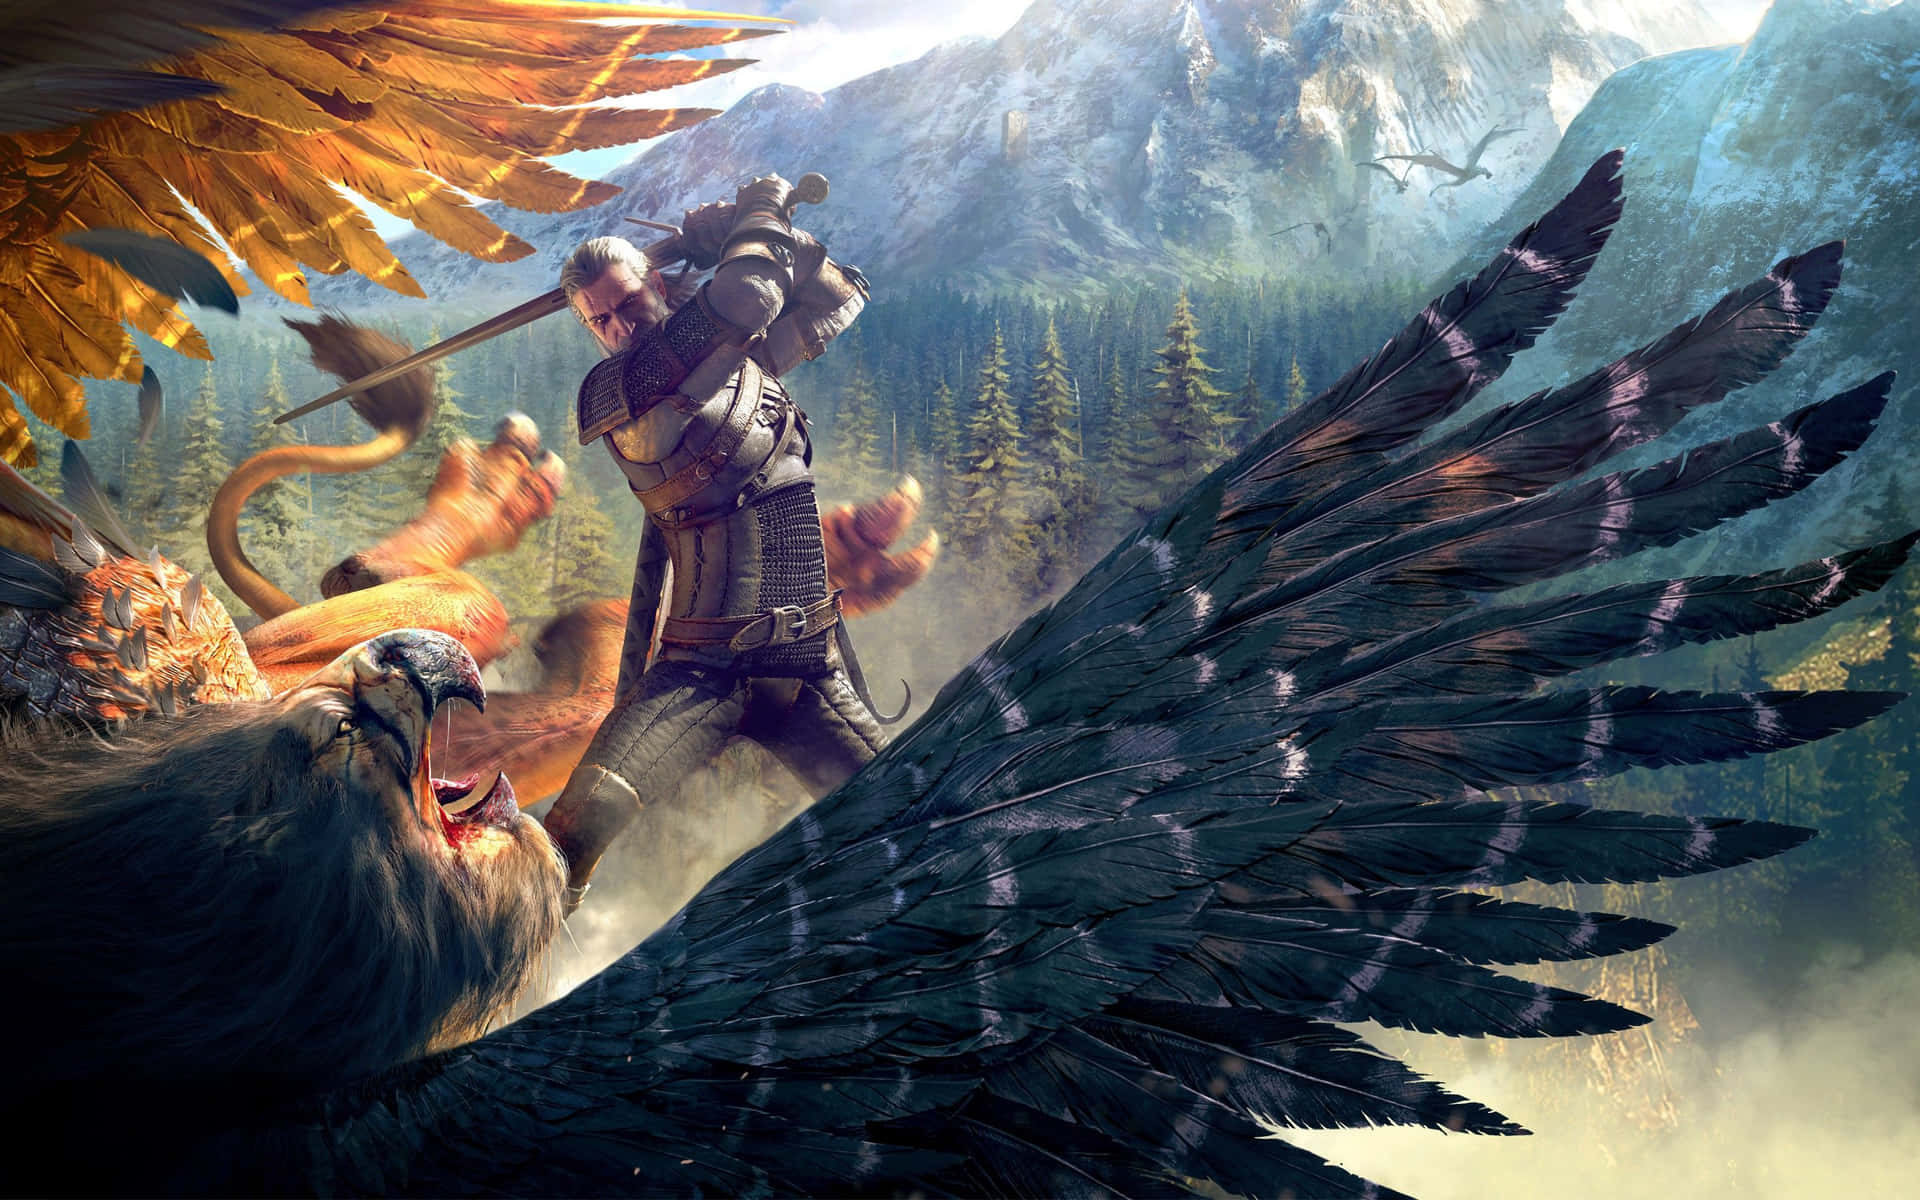 Immerse yourself in the breathtaking world of Witcher 3 with this amazing desktop wallpaper! Wallpaper